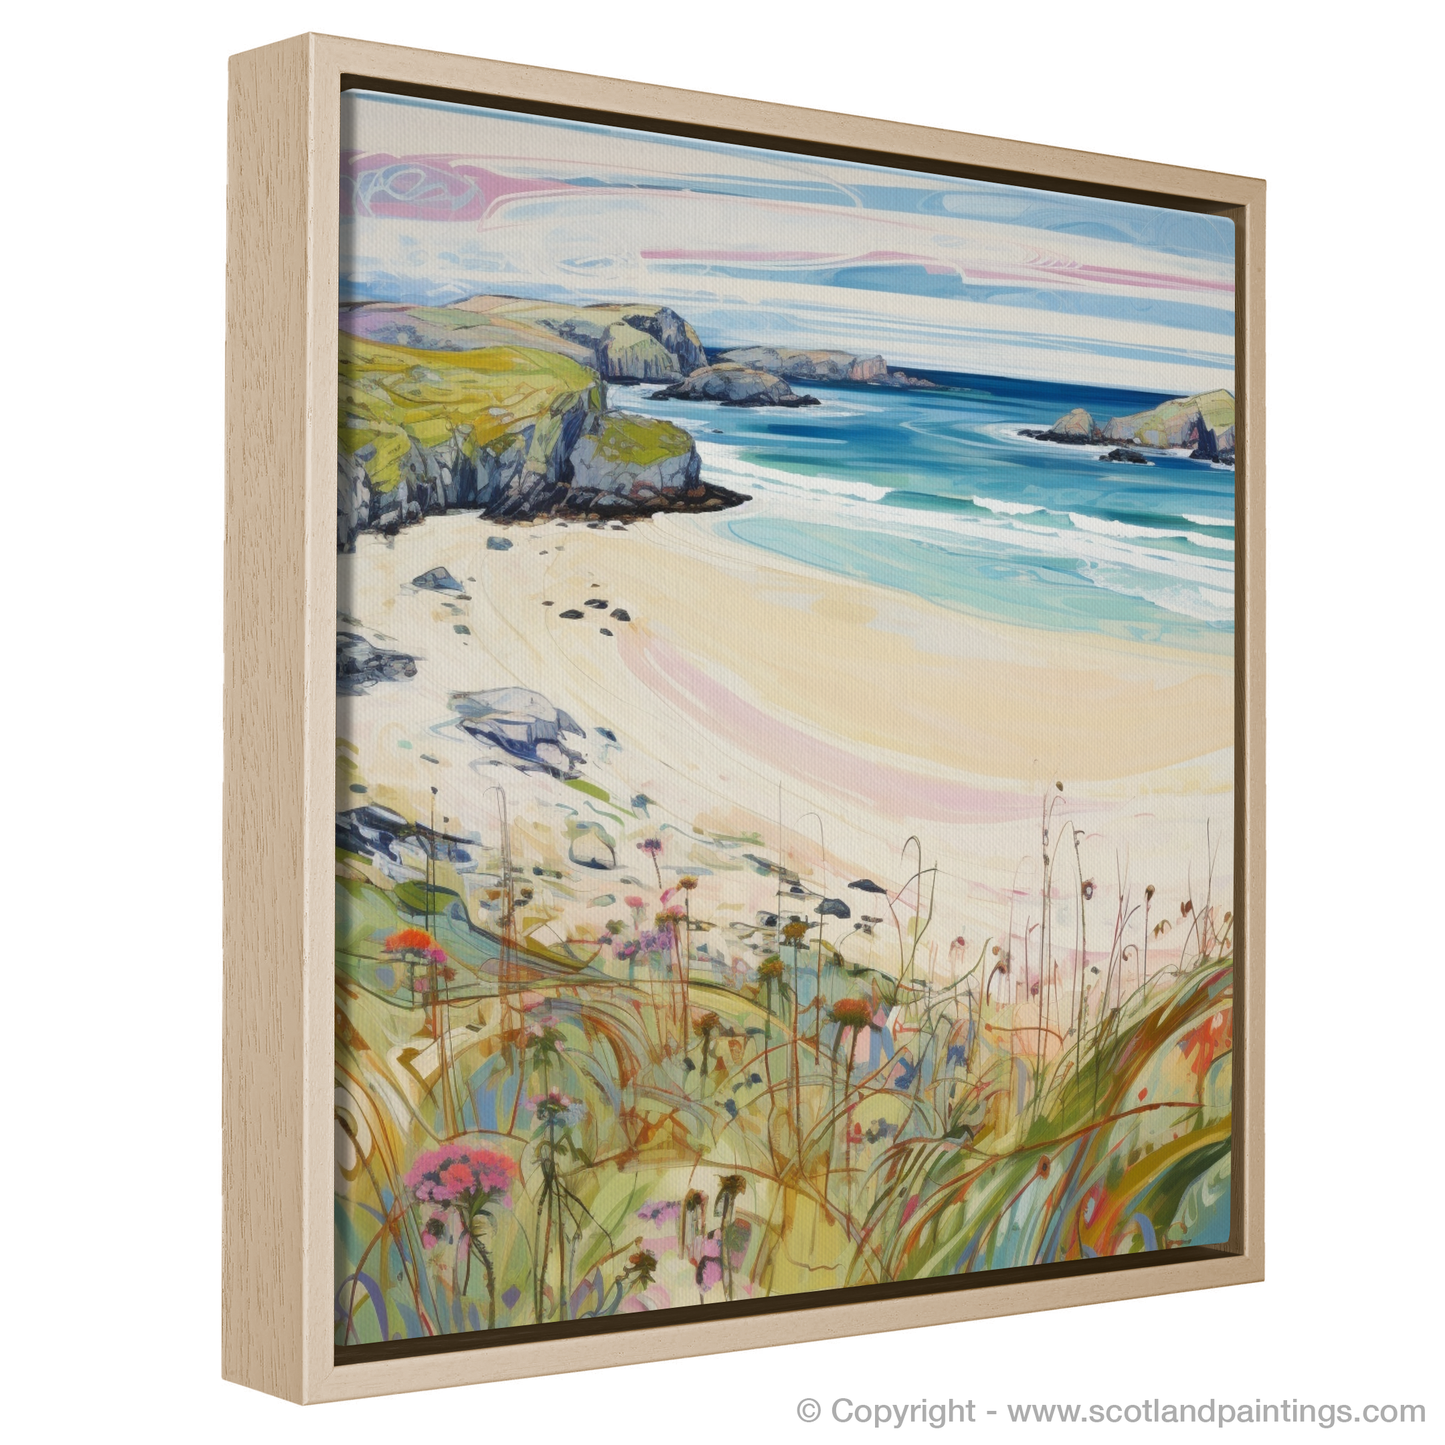 Painting and Art Print of Durness Beach, Sutherland in summer entitled "Summer Serenade at Durness Beach Sutherland".